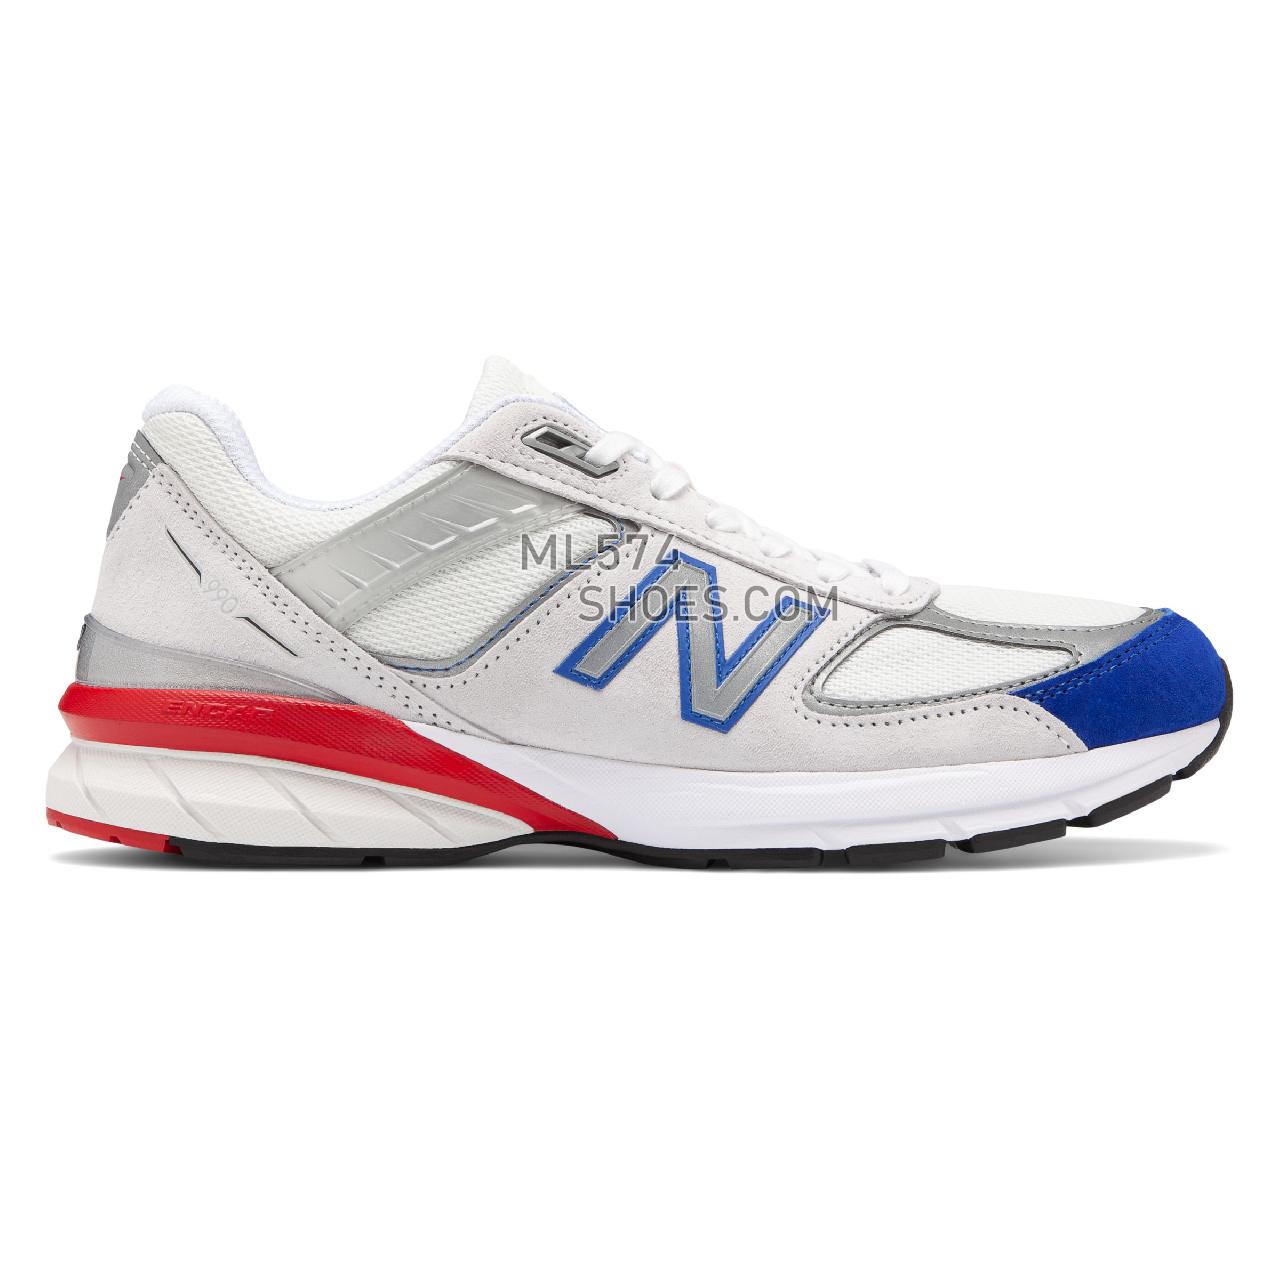 New Balance 990v5 Made in US - Men's Neutral Running - Nimbus Cloud with Team Royal and Team Red - M990NB5